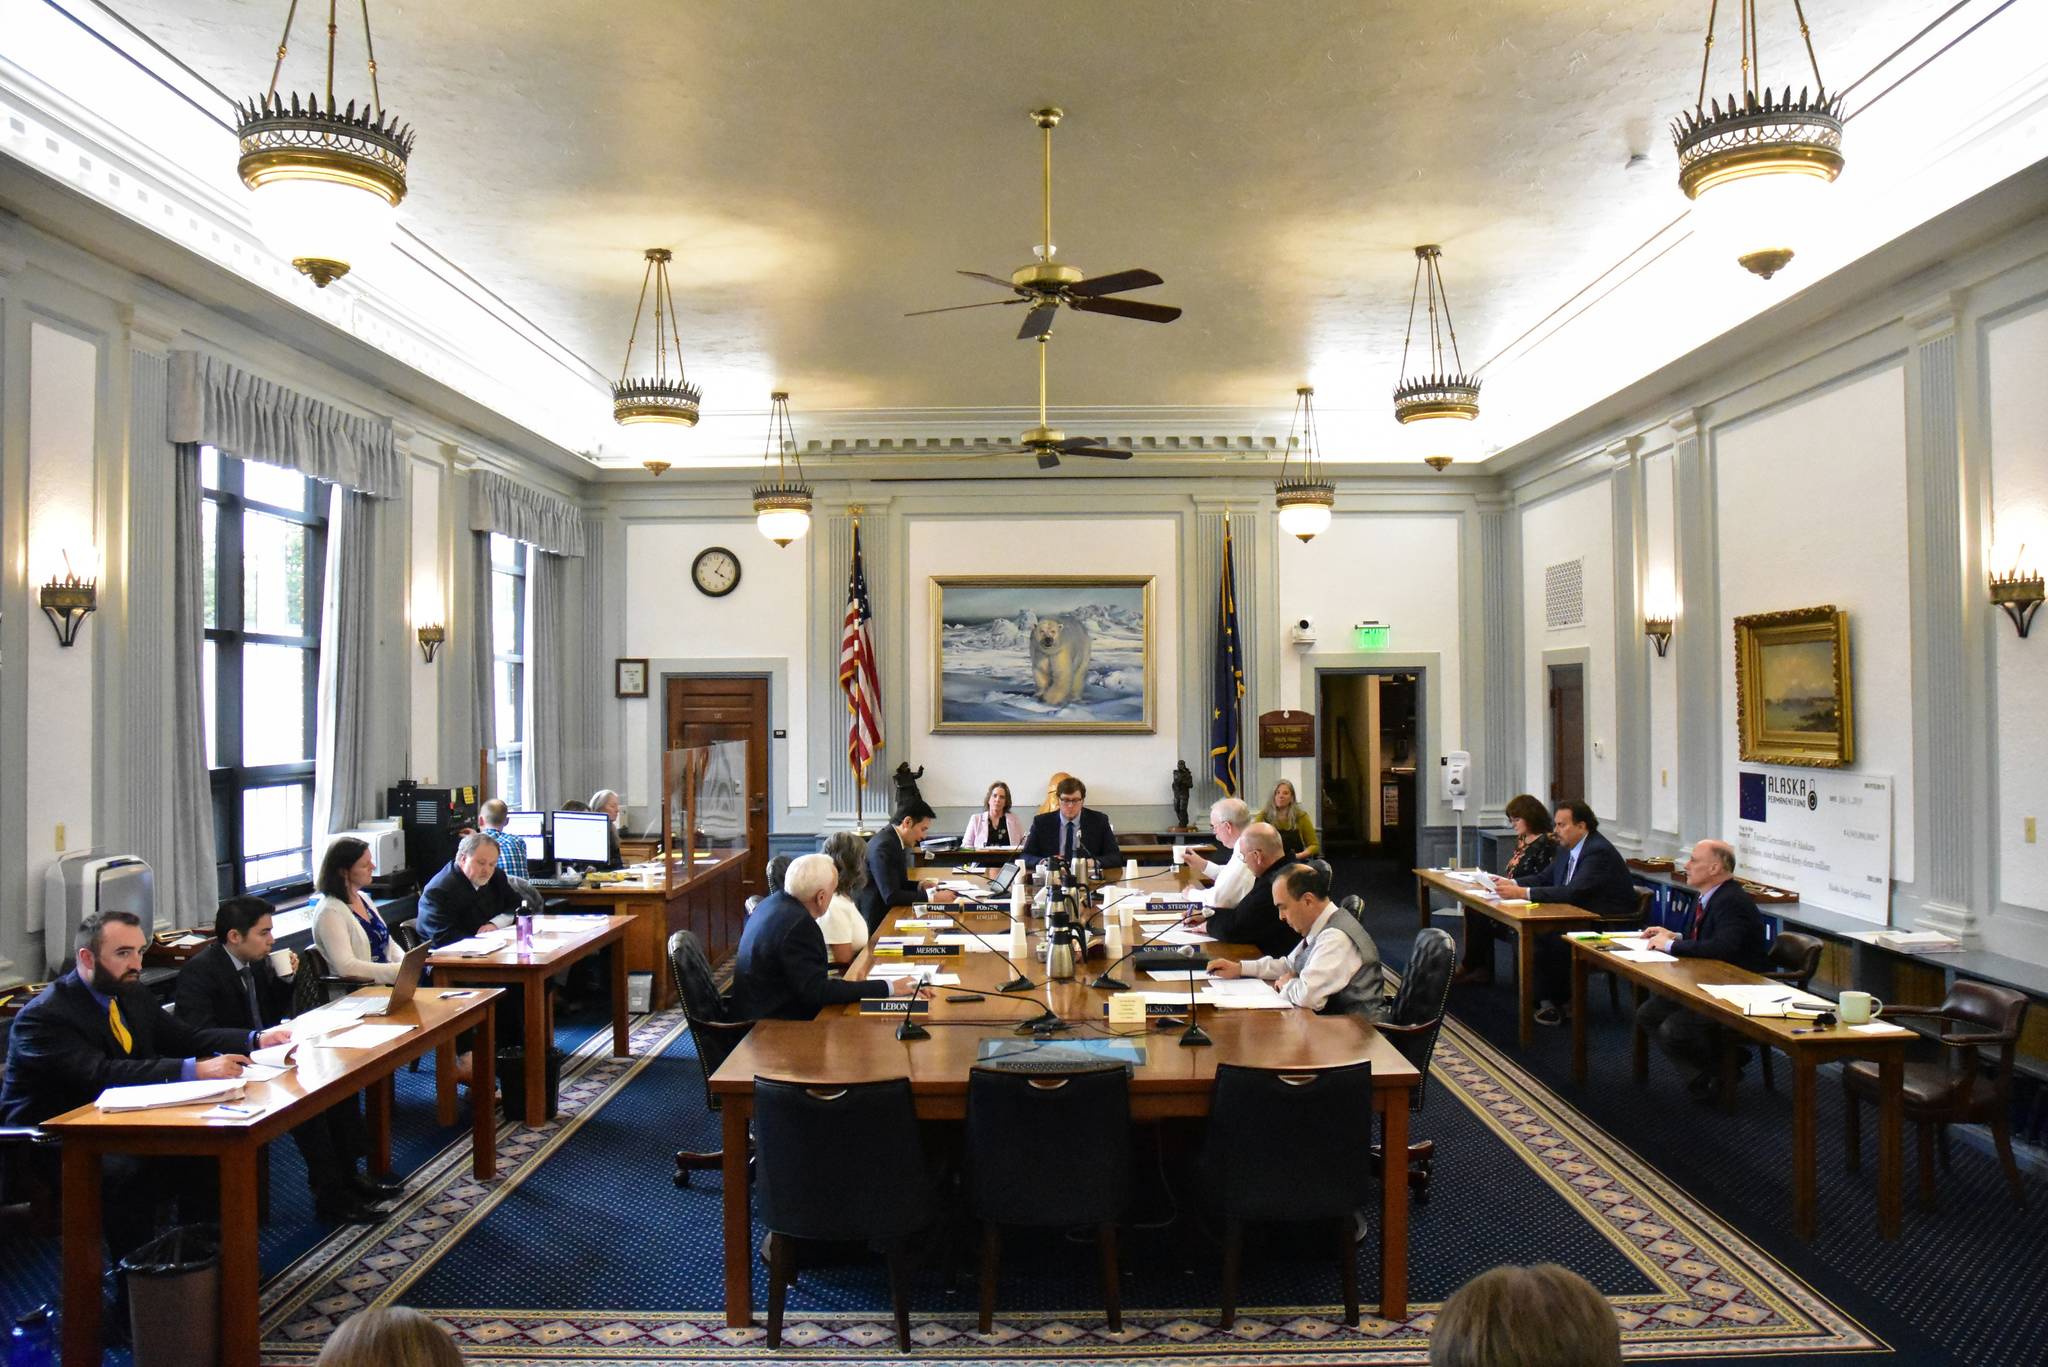 Peter Segall / Juneau Empire
Members of a bicameral conference committee of lawmakers, seen here at their first meeting on Wednesday, May 26, 2021, met again Thursday to negotiate the final version of the state’s budget.